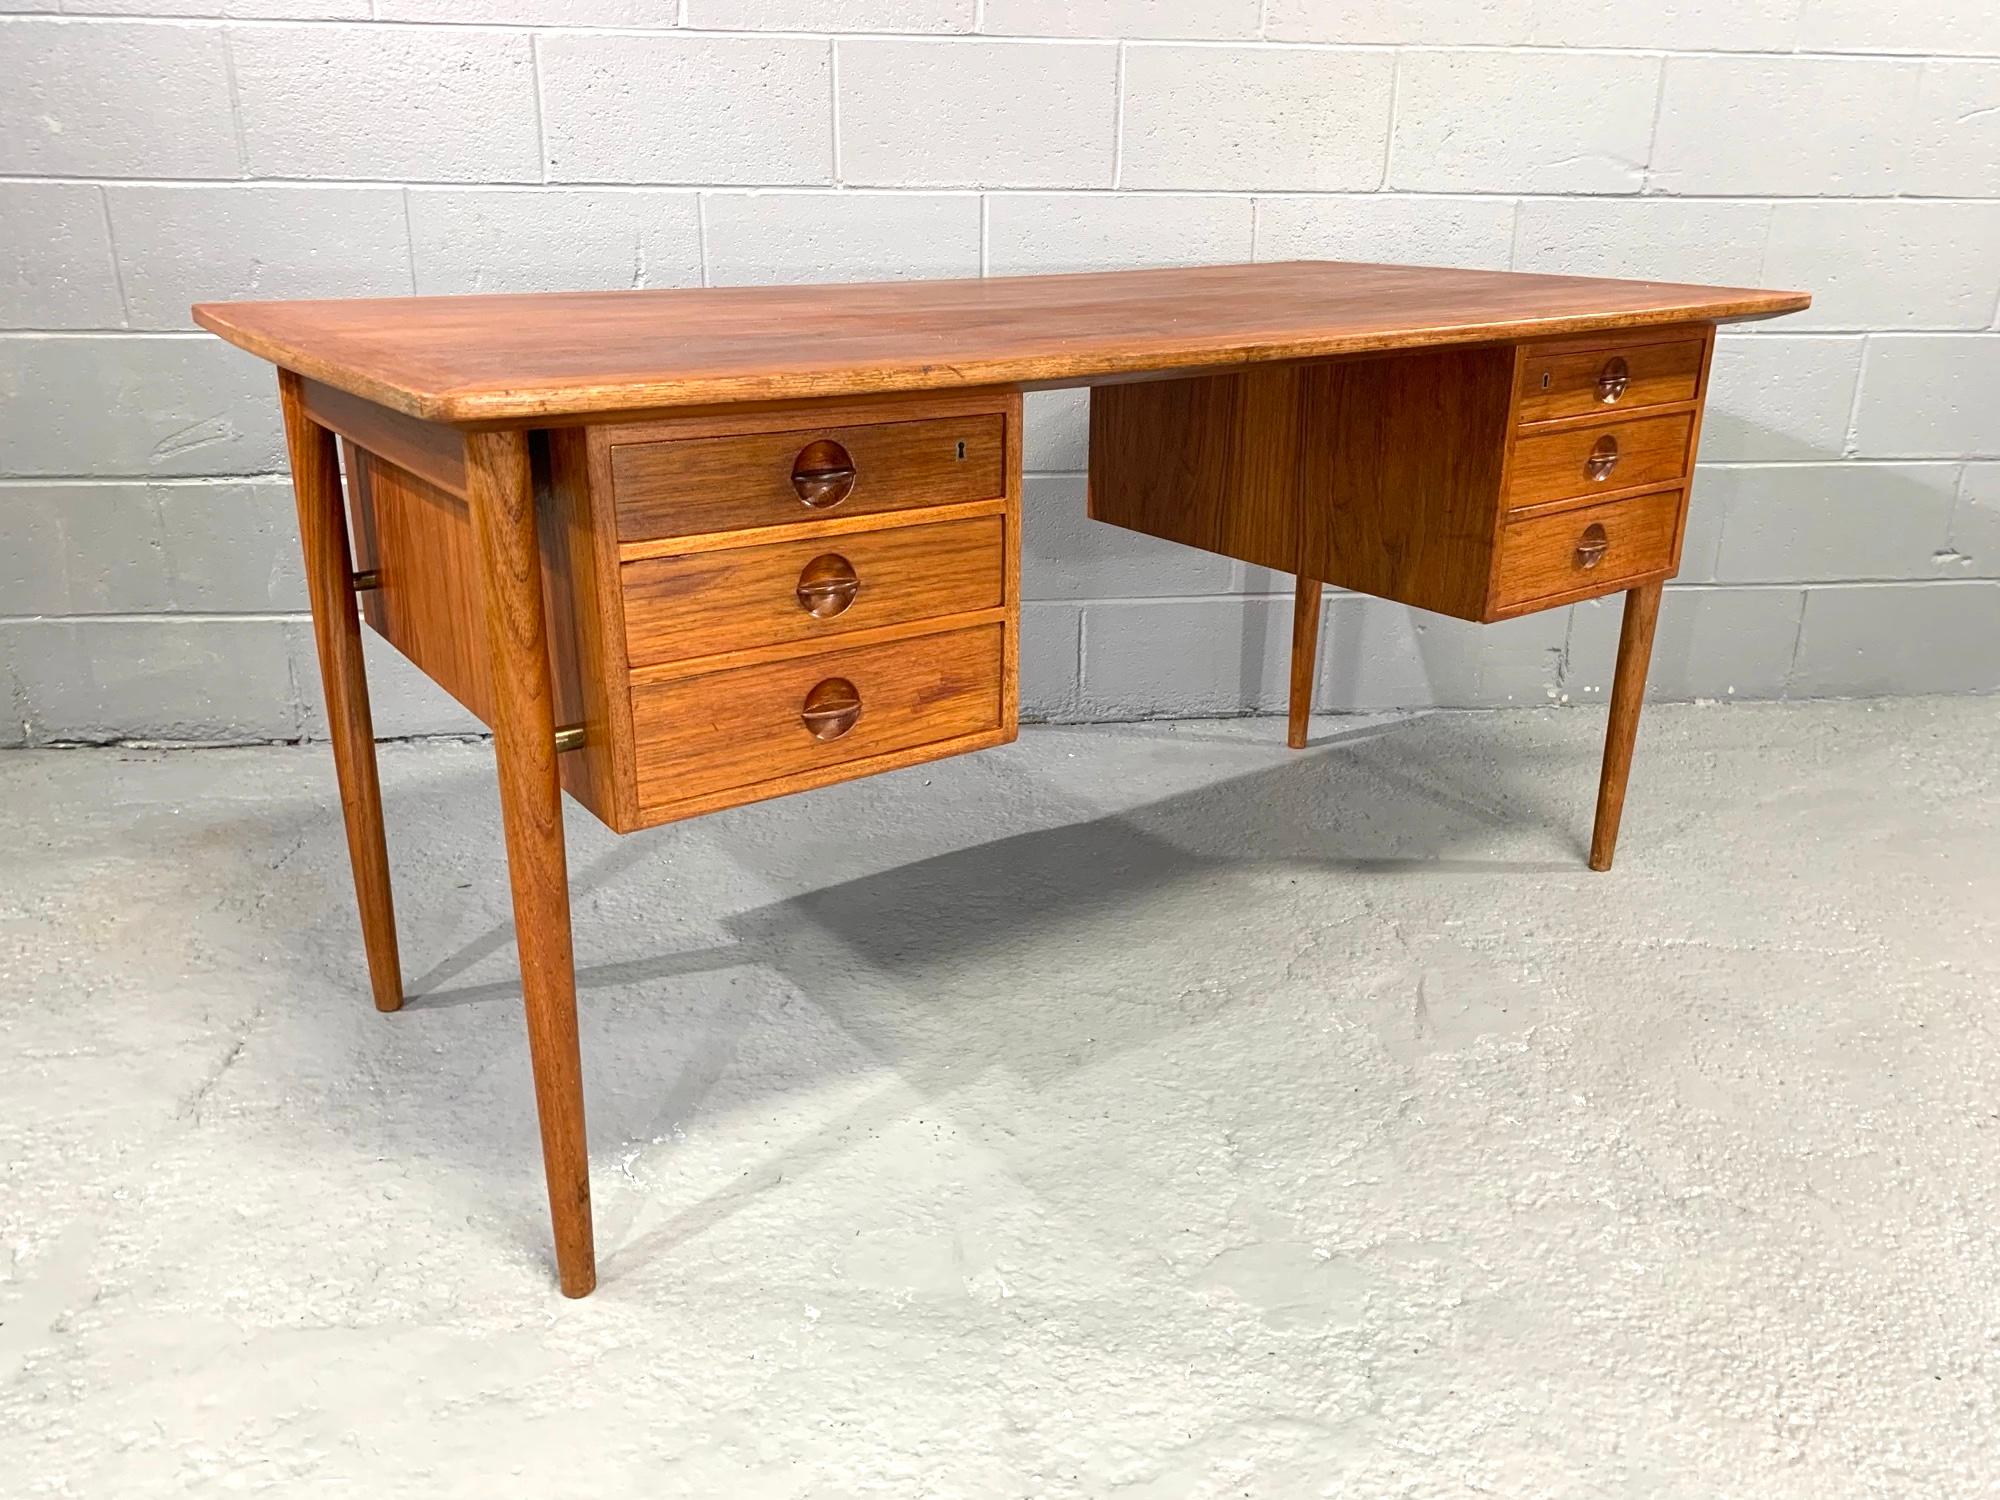 Nicely crafted Danish modern, midcentury desk with floating top and hanging case design with round teak drawer pulls attributed to Kai Kristiansen.